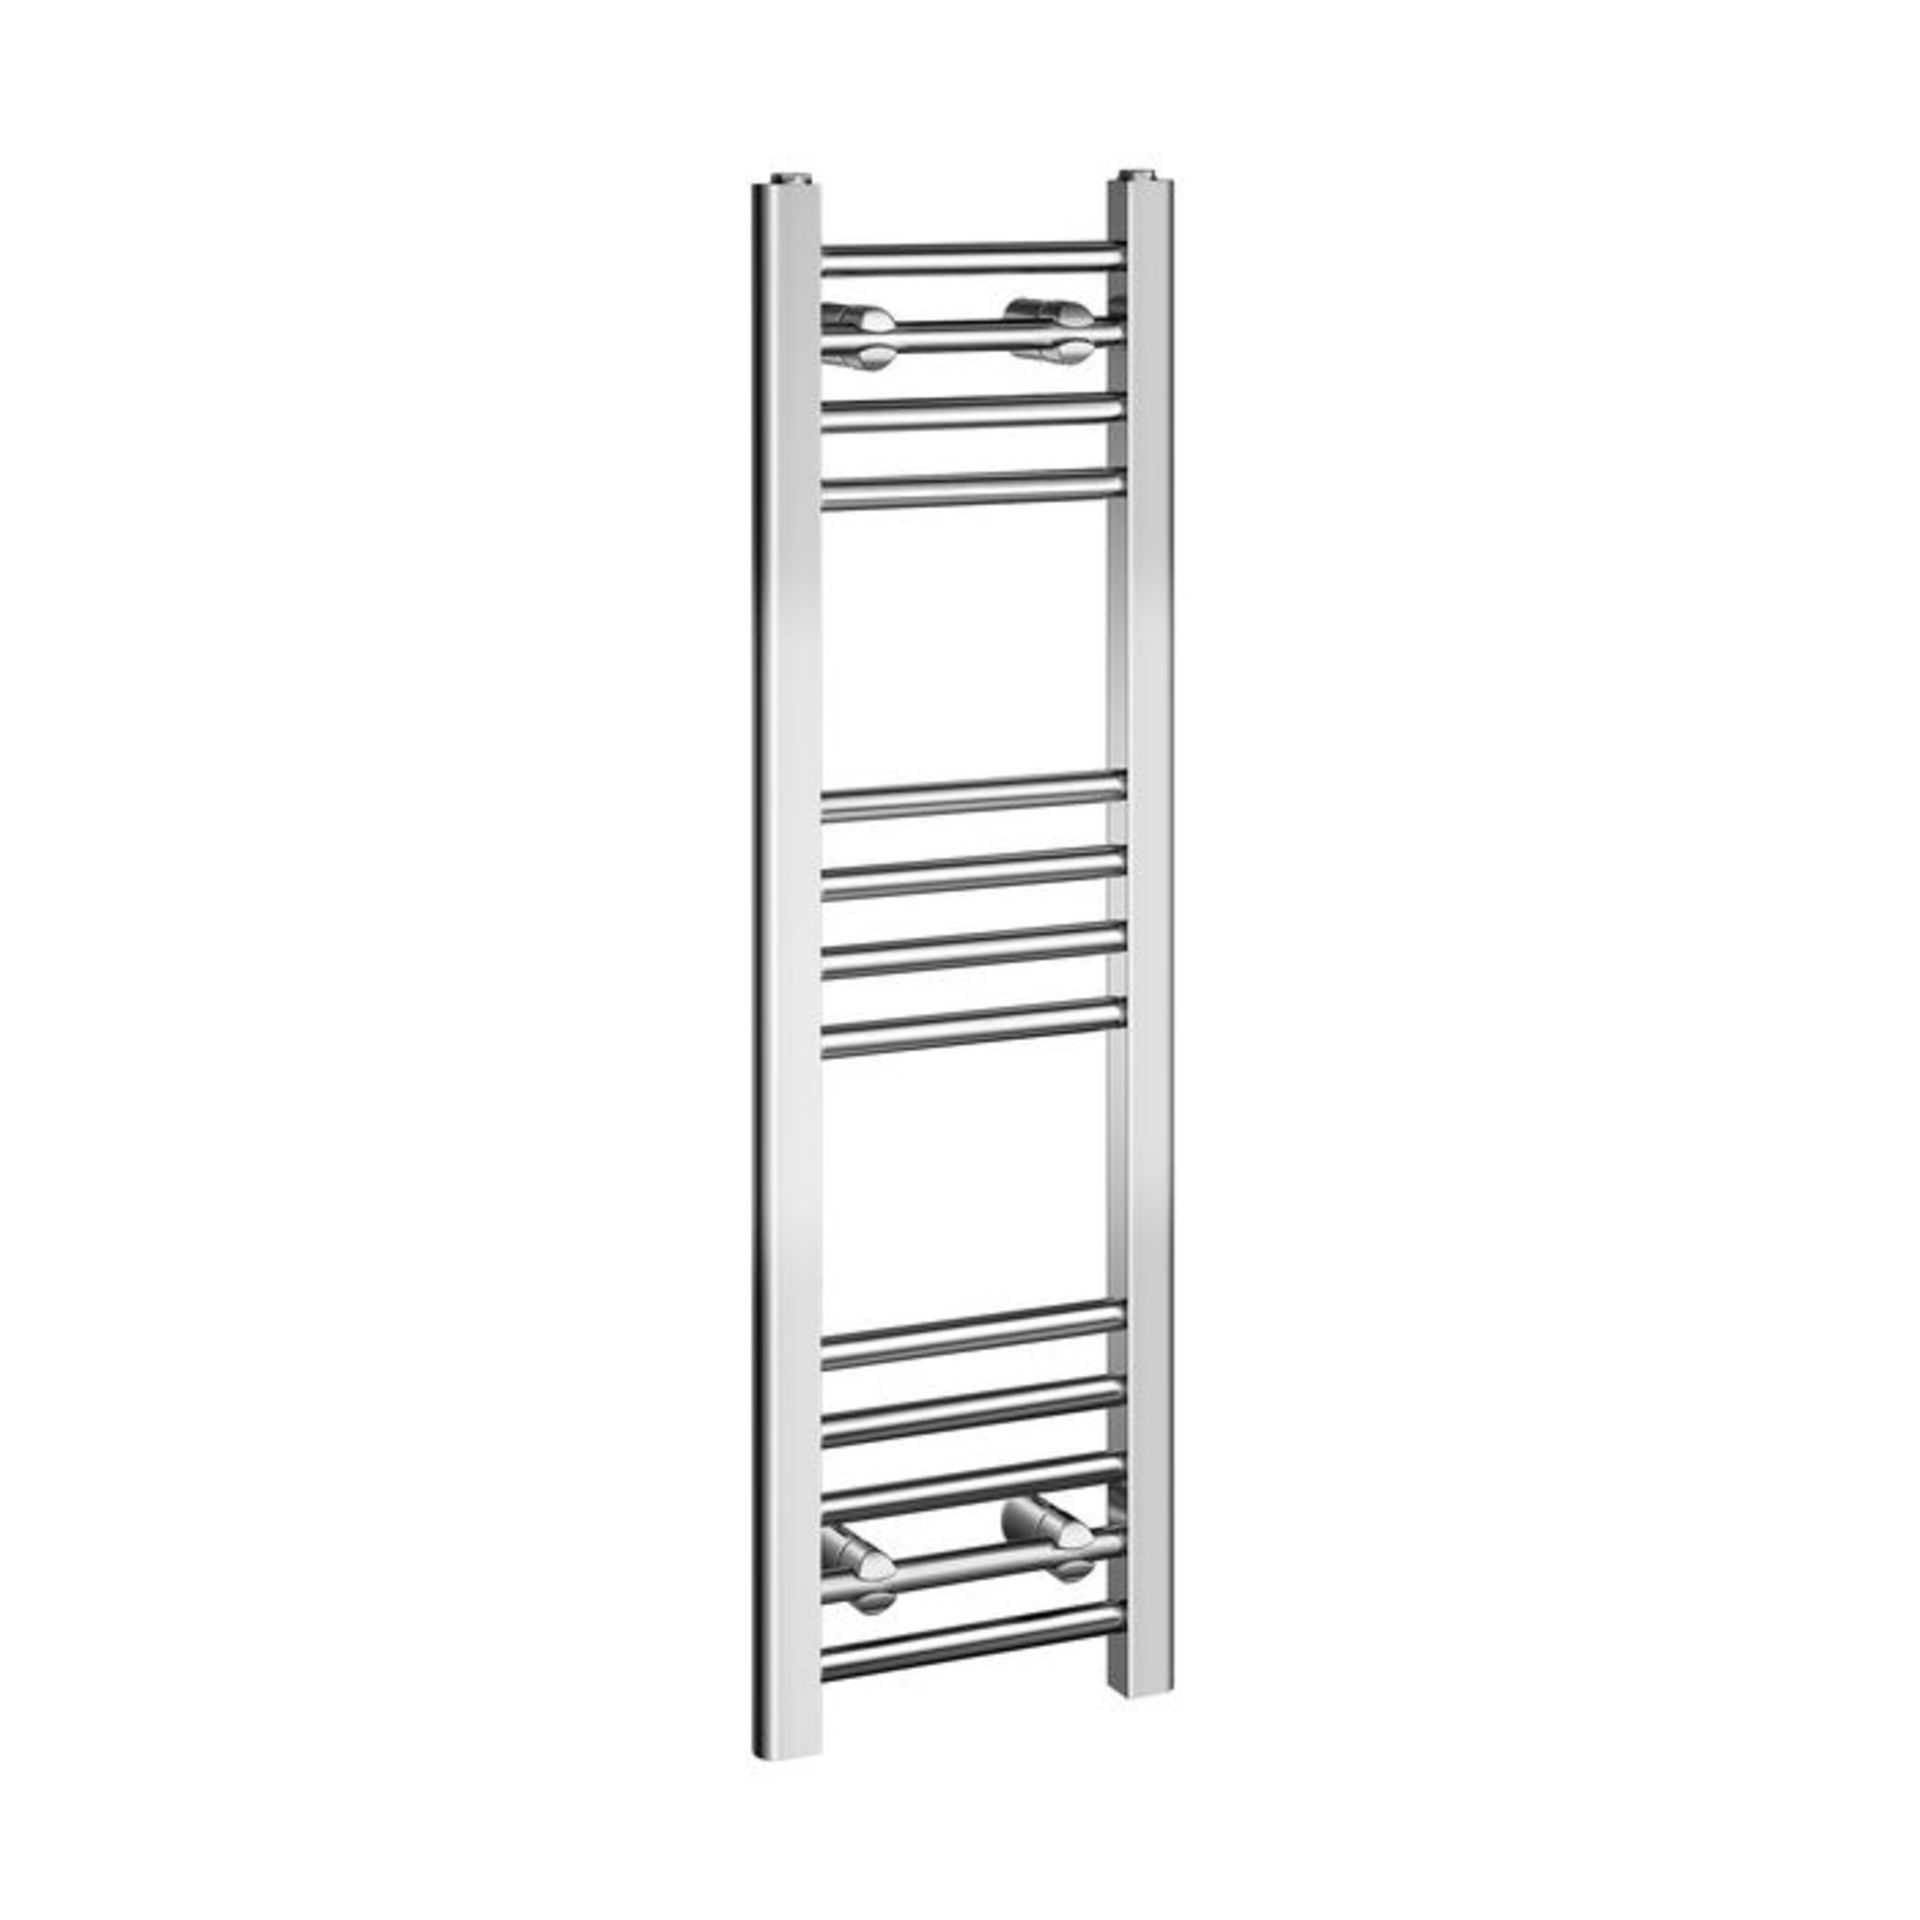 (OS280) 1000x300mm - 20mm Tubes - Chrome Heated Straight Rail Ladder Towel Rail. RRP £185.99. Made - Image 3 of 3